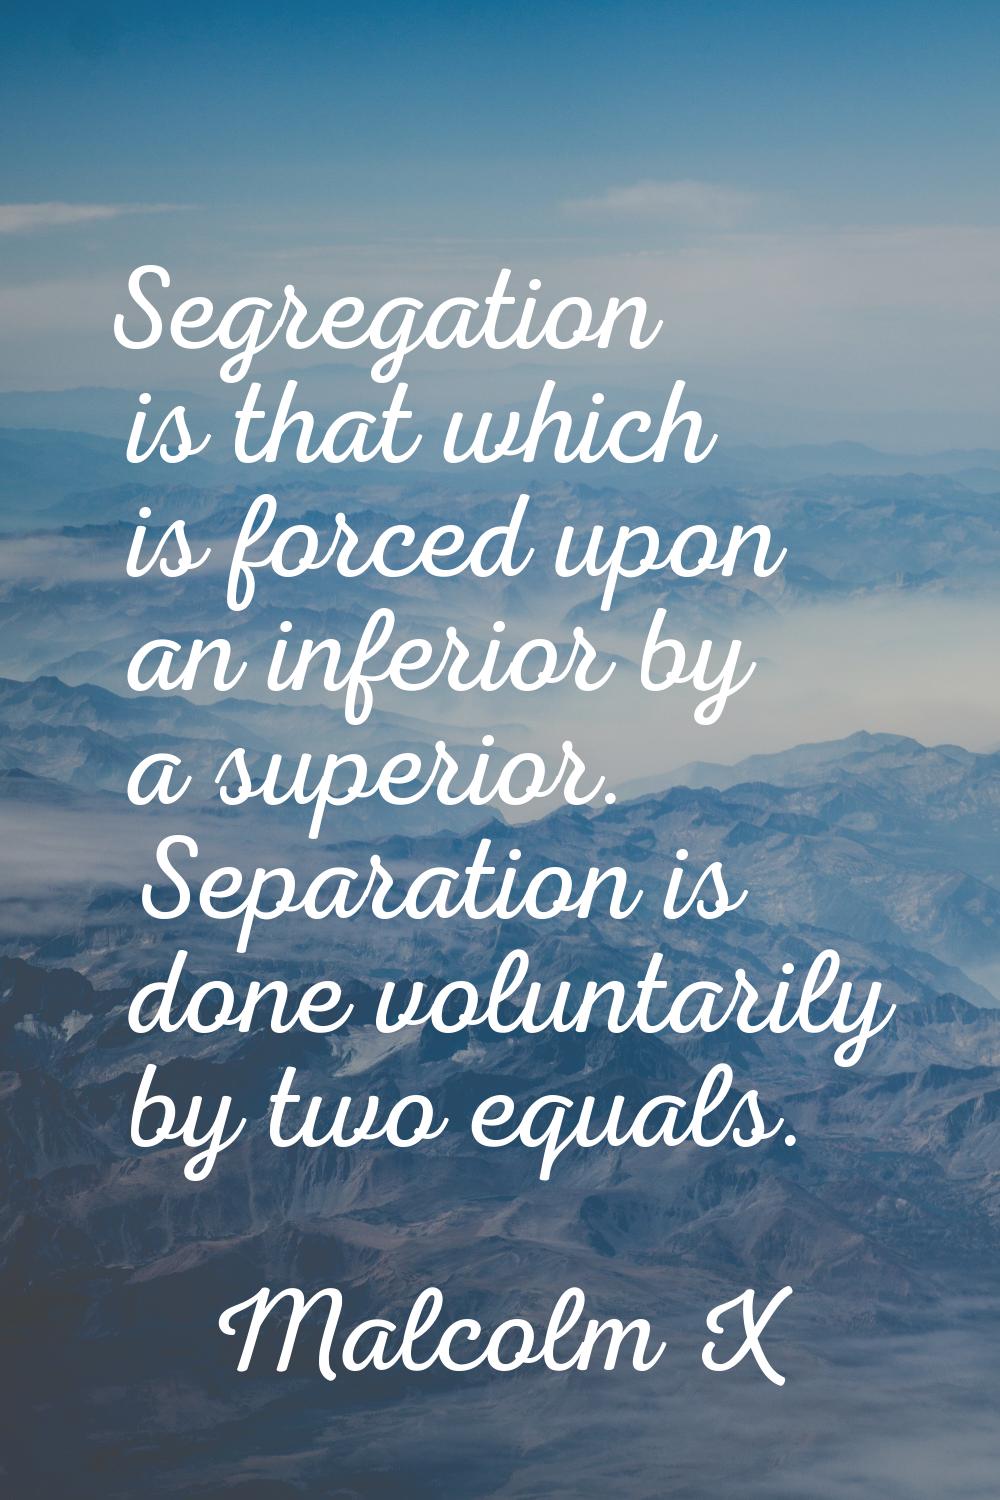 Segregation is that which is forced upon an inferior by a superior. Separation is done voluntarily 